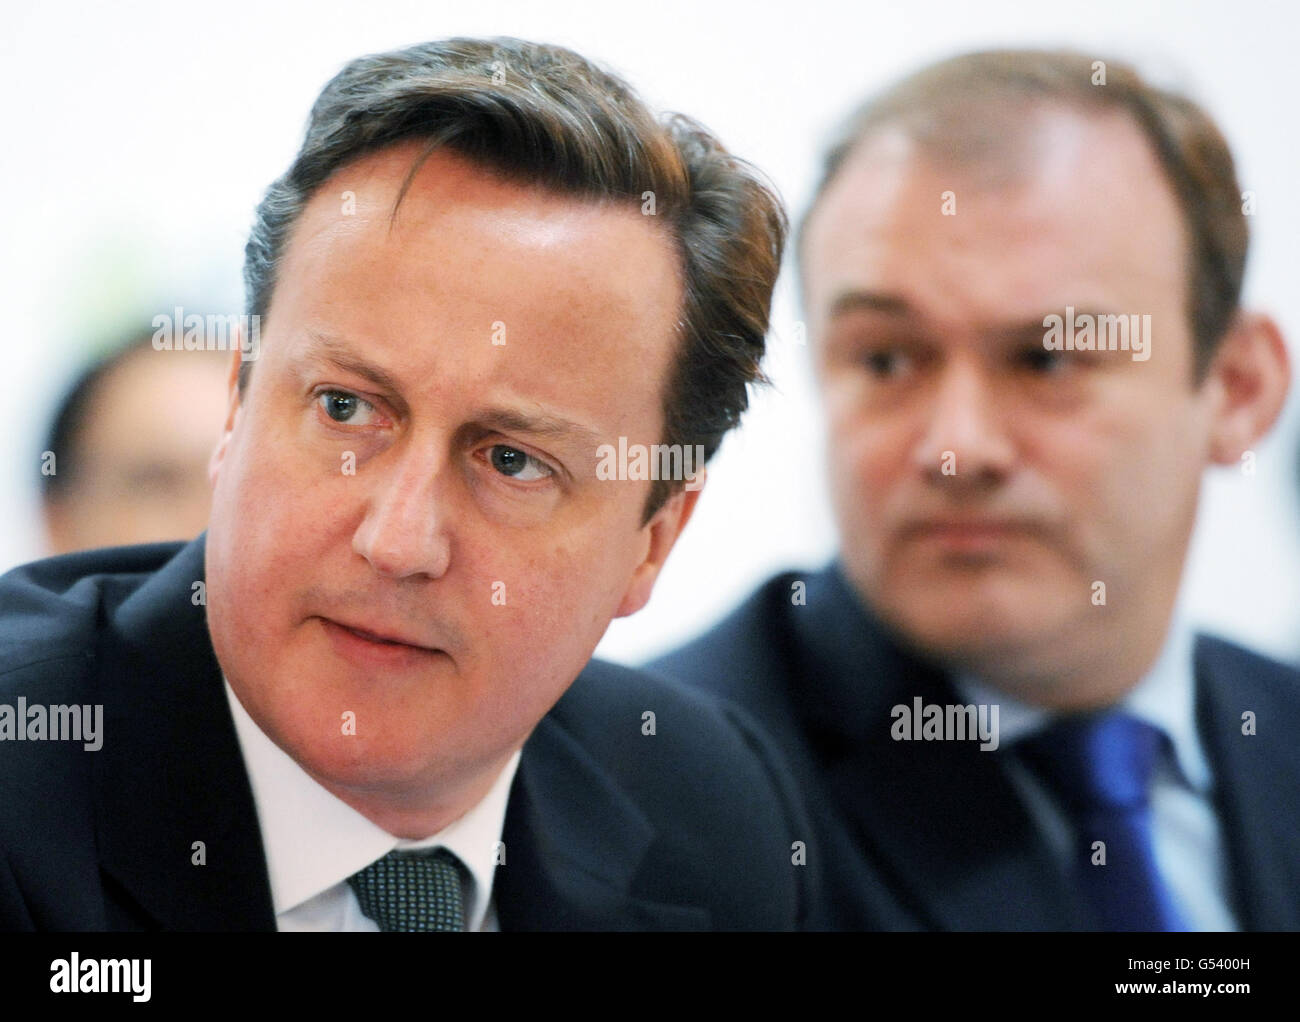 Prime Minister David Cameron speaks at the Clean Energy Ministerial Conference in London today alongside his Energy Secretary Ed Davey (right). Stock Photo